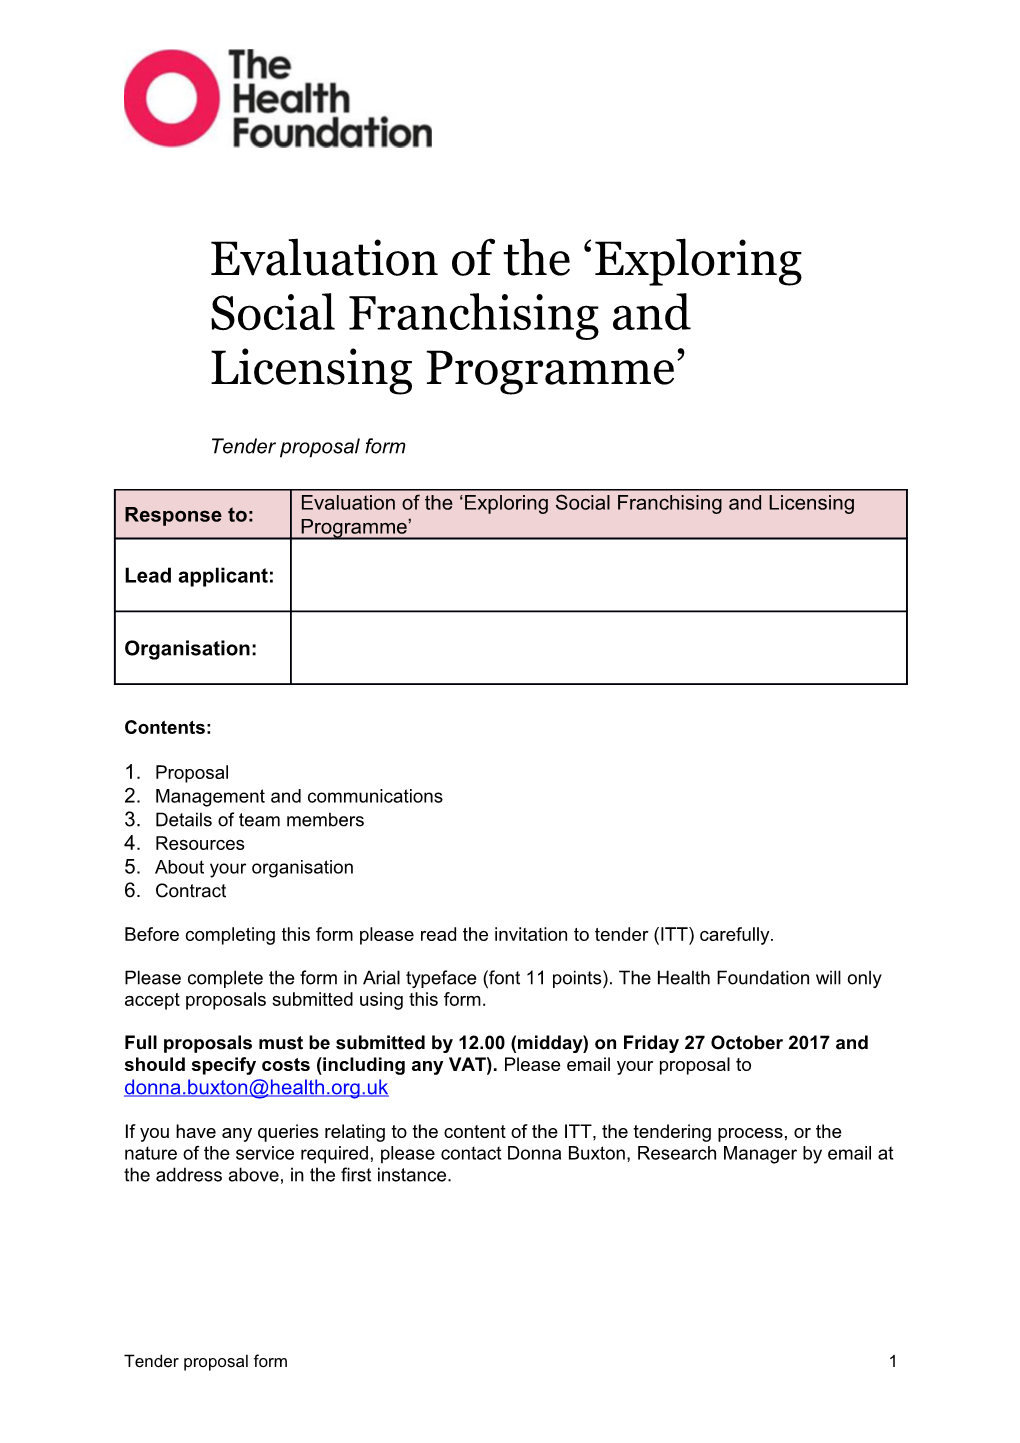 Evaluation of the Exploring Social Franchising and Licensing Programme